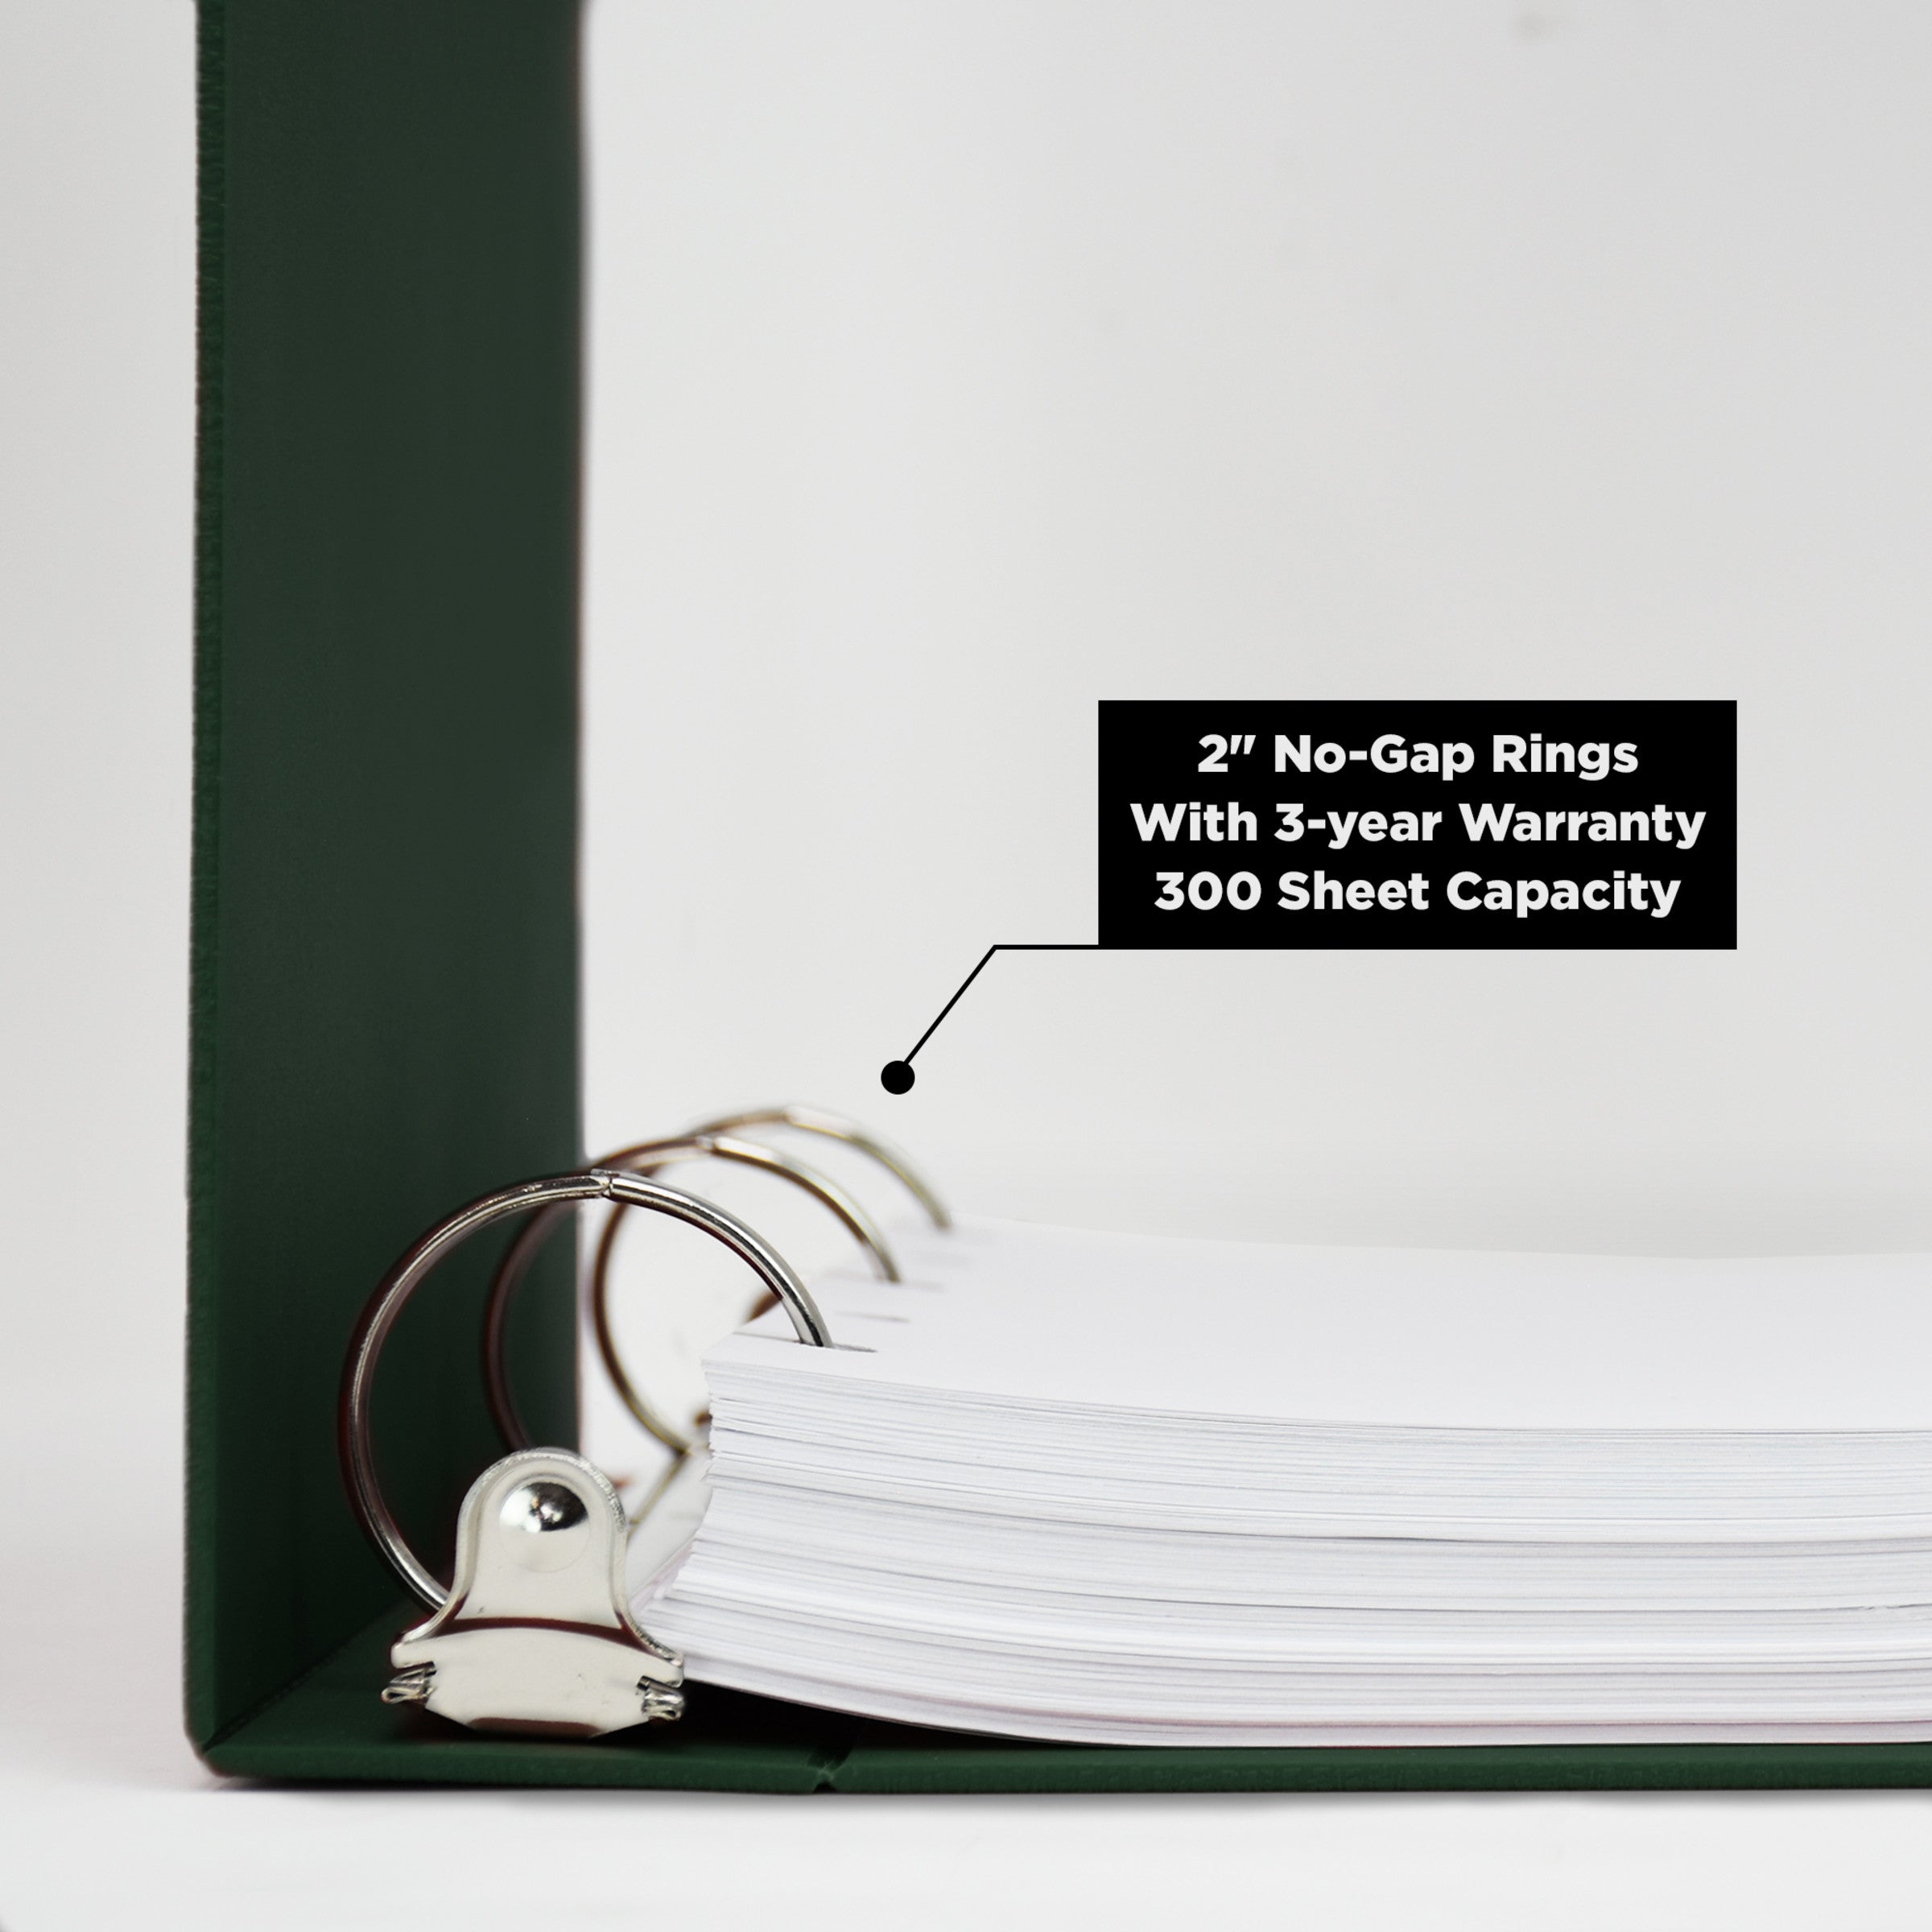 Heavy Duty Medical Administration Record (MAR) 3-Ring Binder – Side Opening